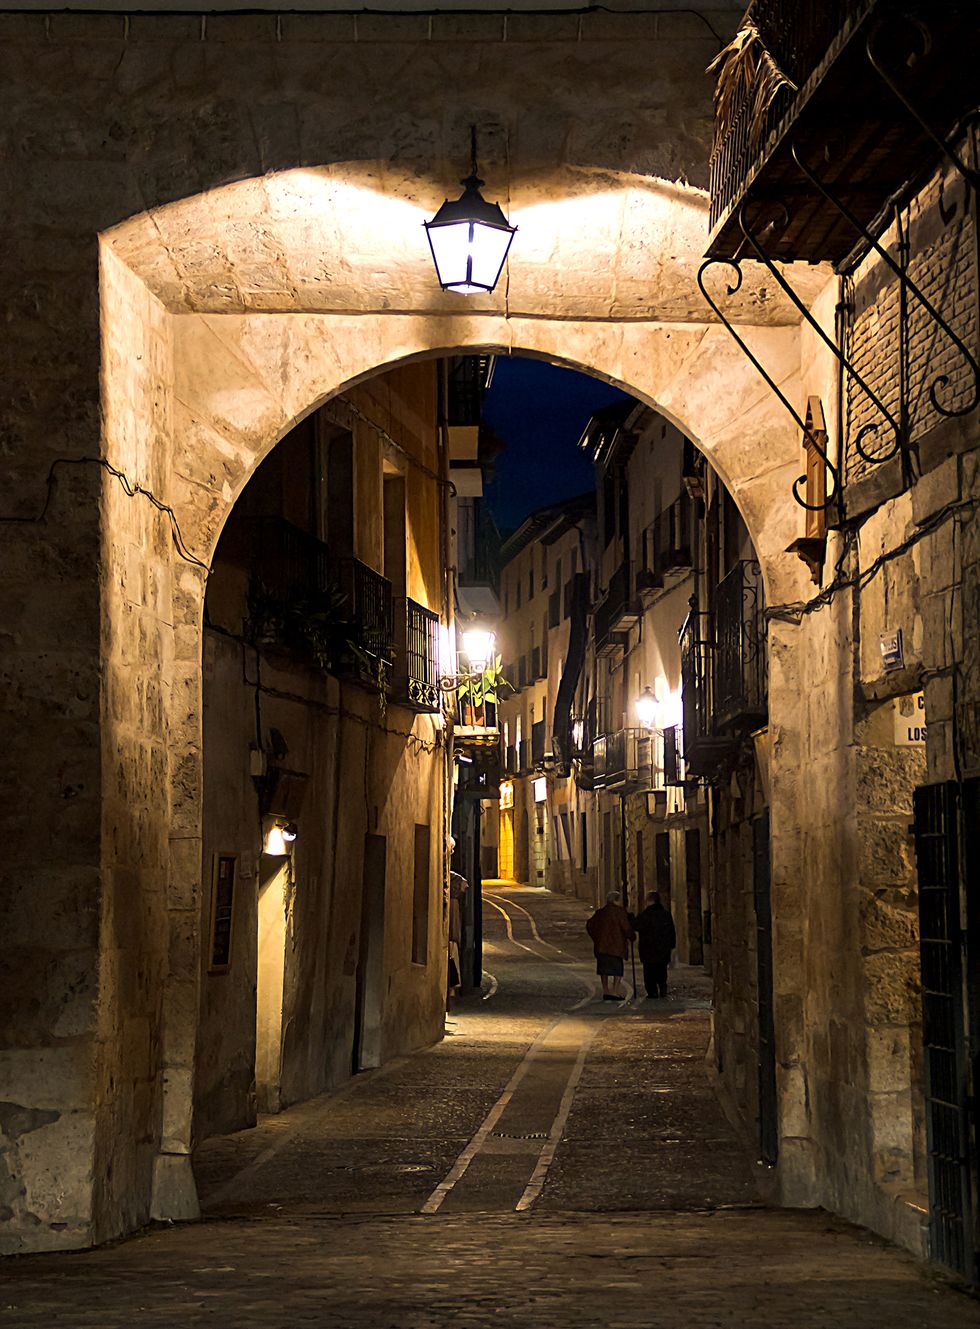 Arch, Lighting, Building, Street, Architecture, Infrastructure, Night, Alley, Road, Crypt, 